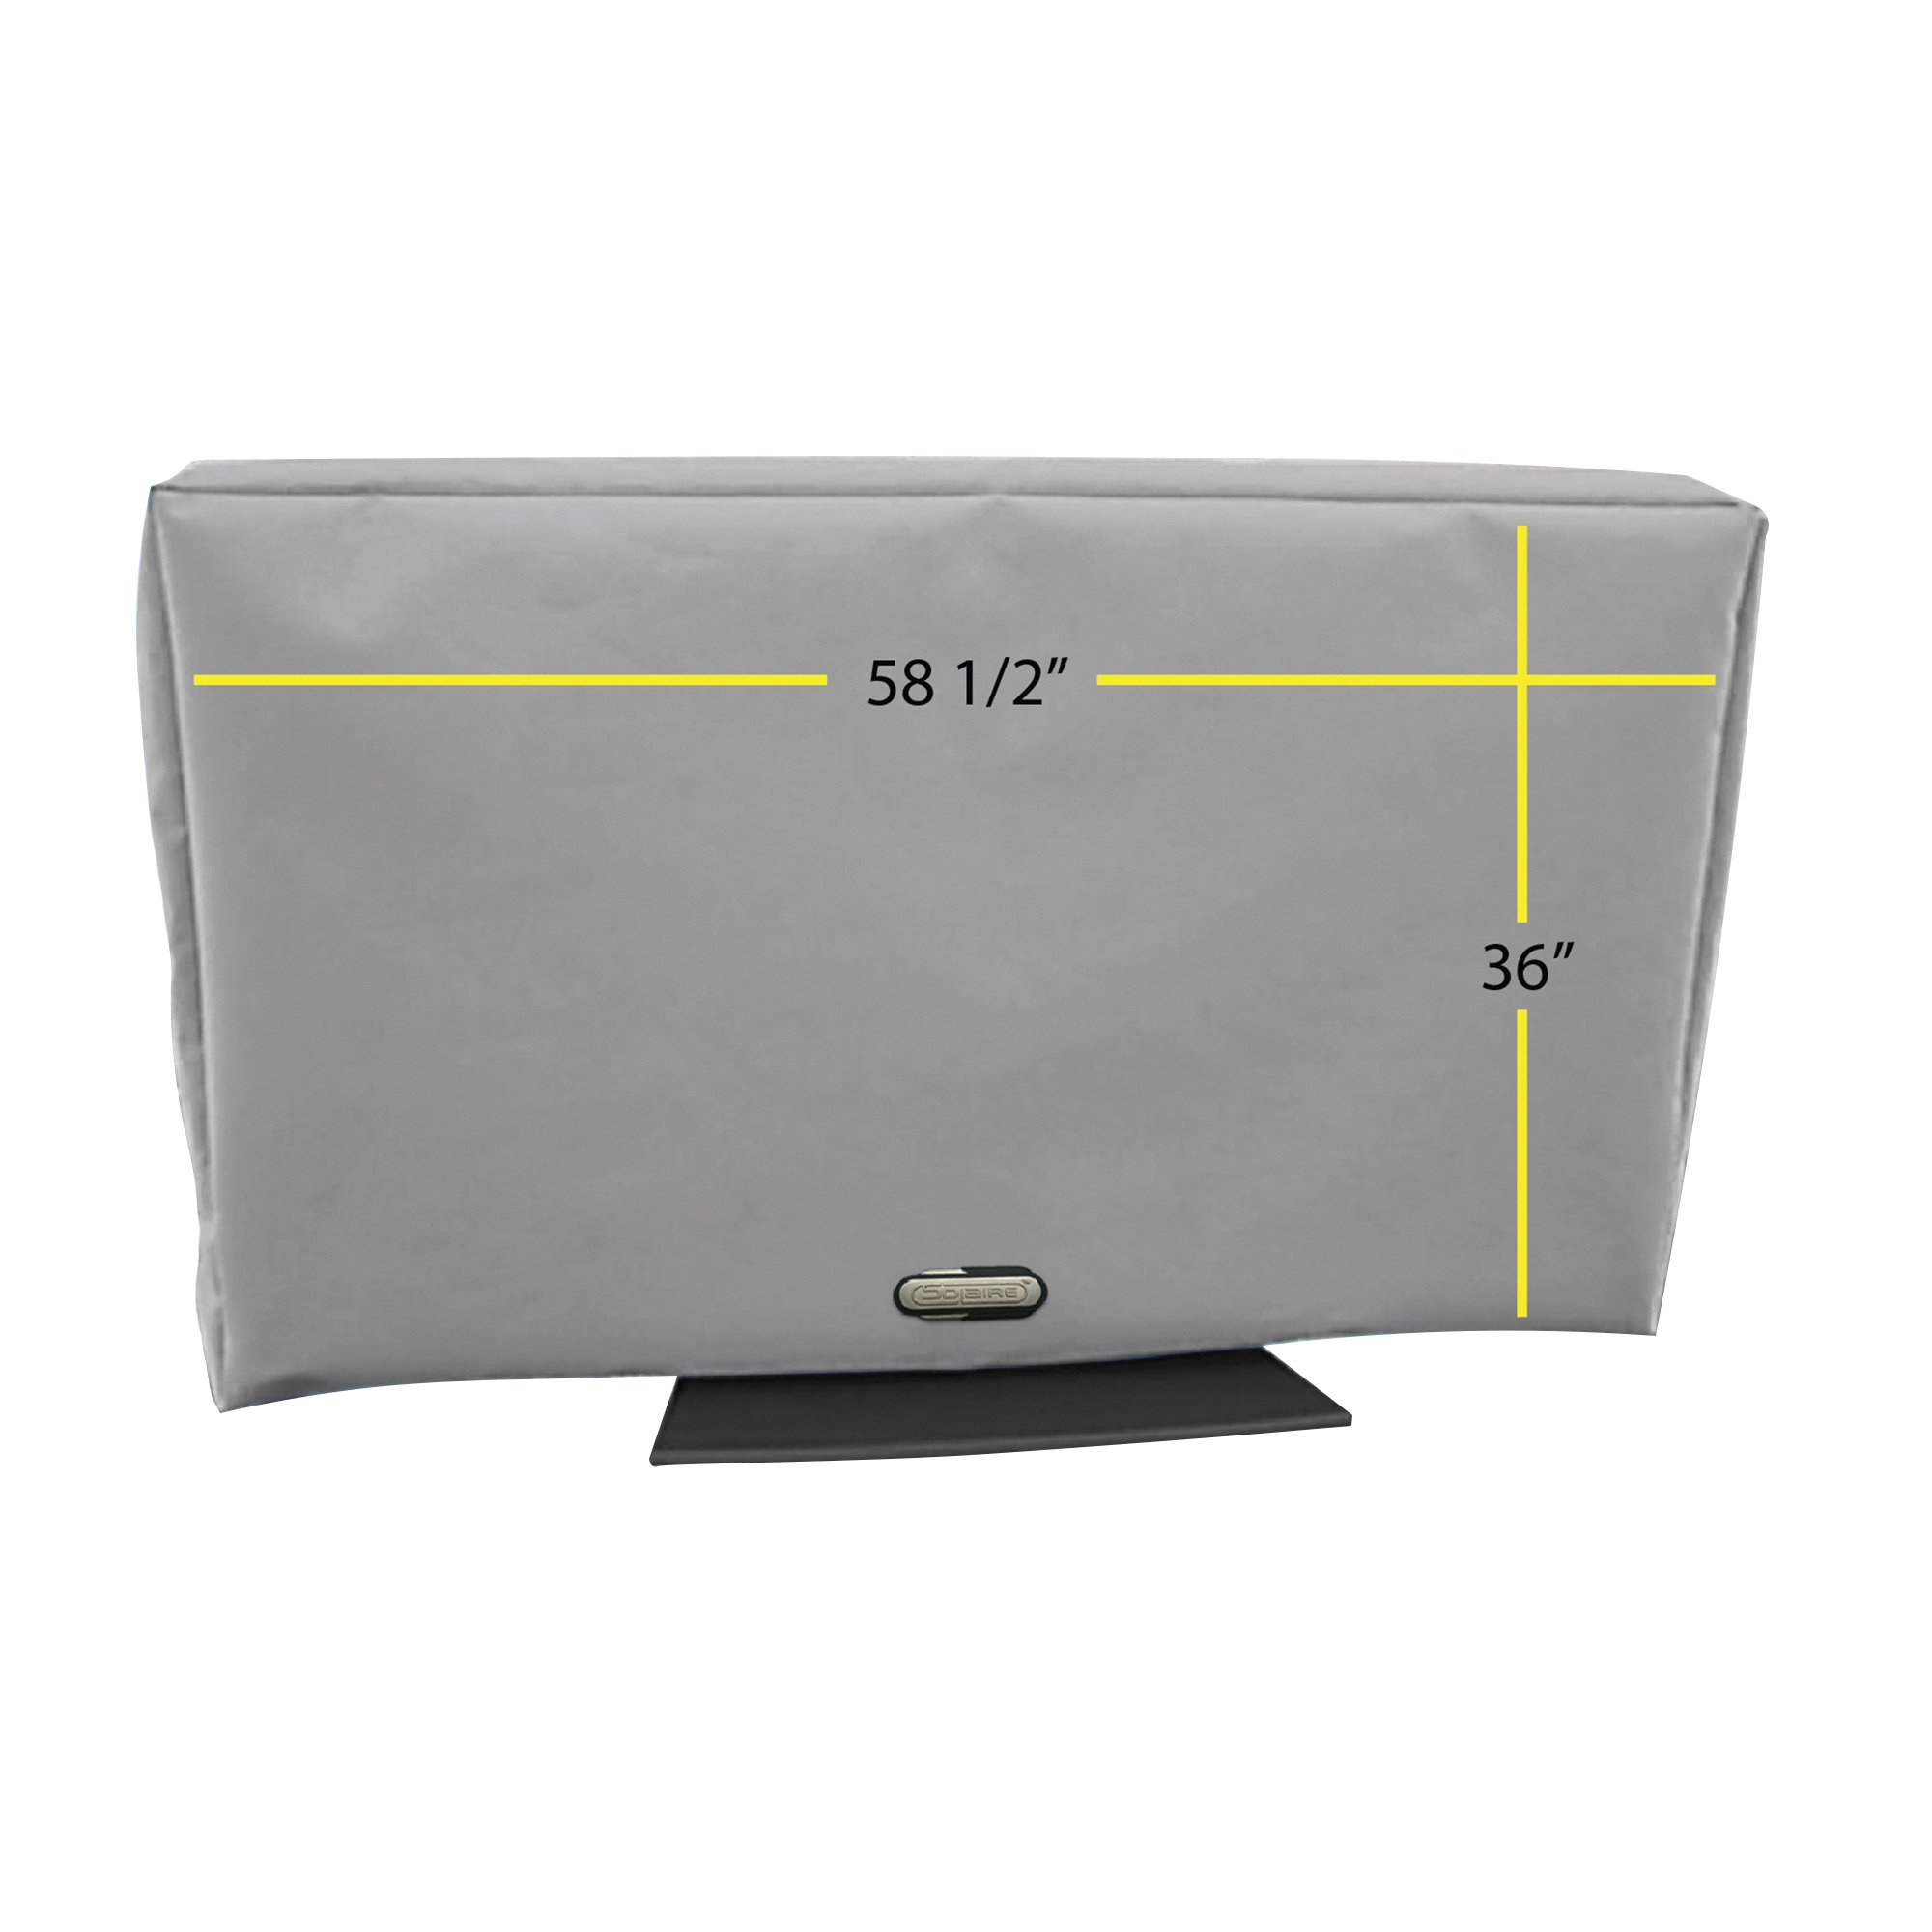 SOLAIRE SOL 65G 60-Inch to 65-Inch Outdoor TV Cover